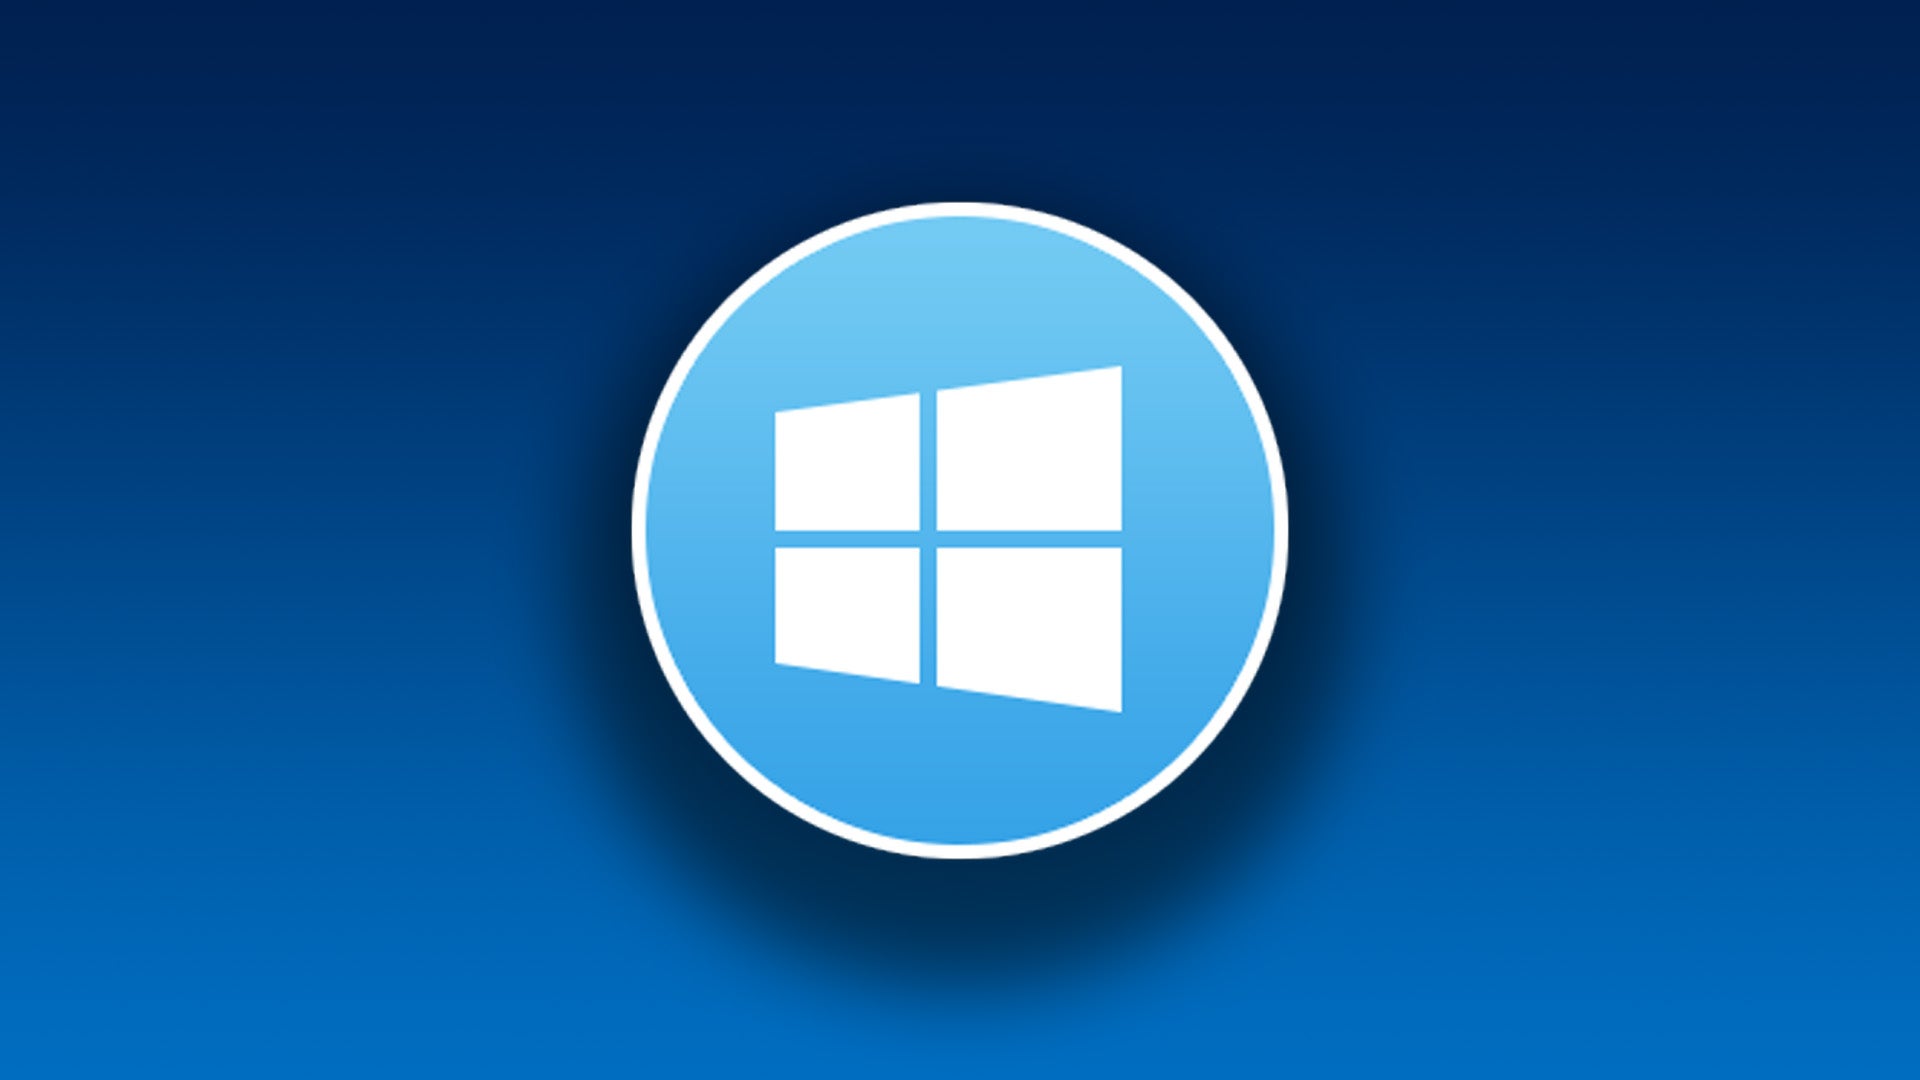 Image for Windows 10 release window may have slipped out of AMD earnings call